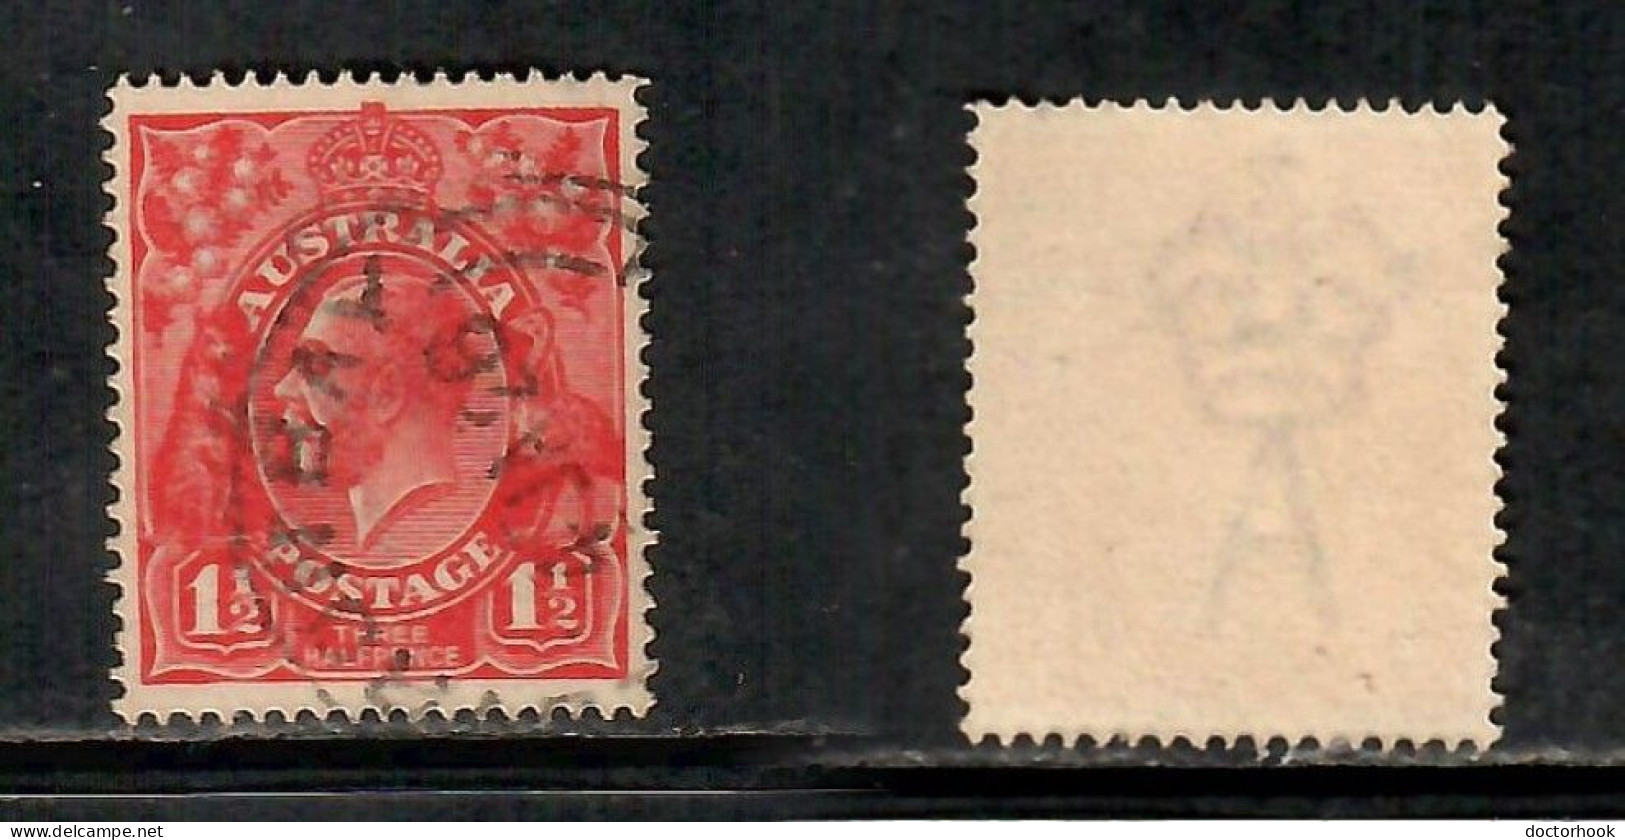 AUSTRALIA    Scott # 26 USED (CONDITION PER SCAN) (Stamp Scan # 1035-15) - Used Stamps